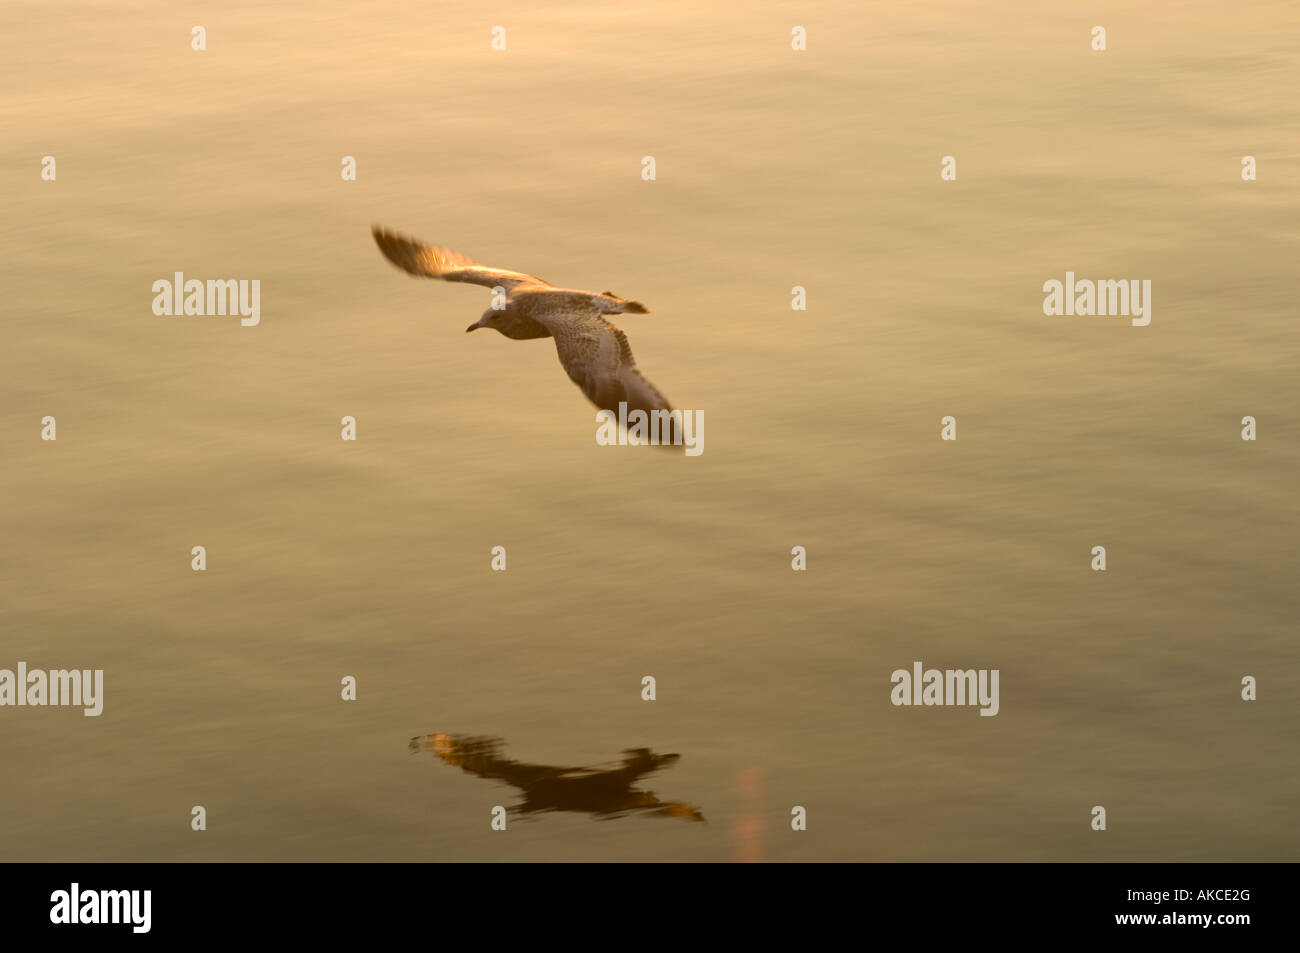 A SEAGULL IN FLIGHT CASTS A REFLECTION IN THE WATER Stock Photo